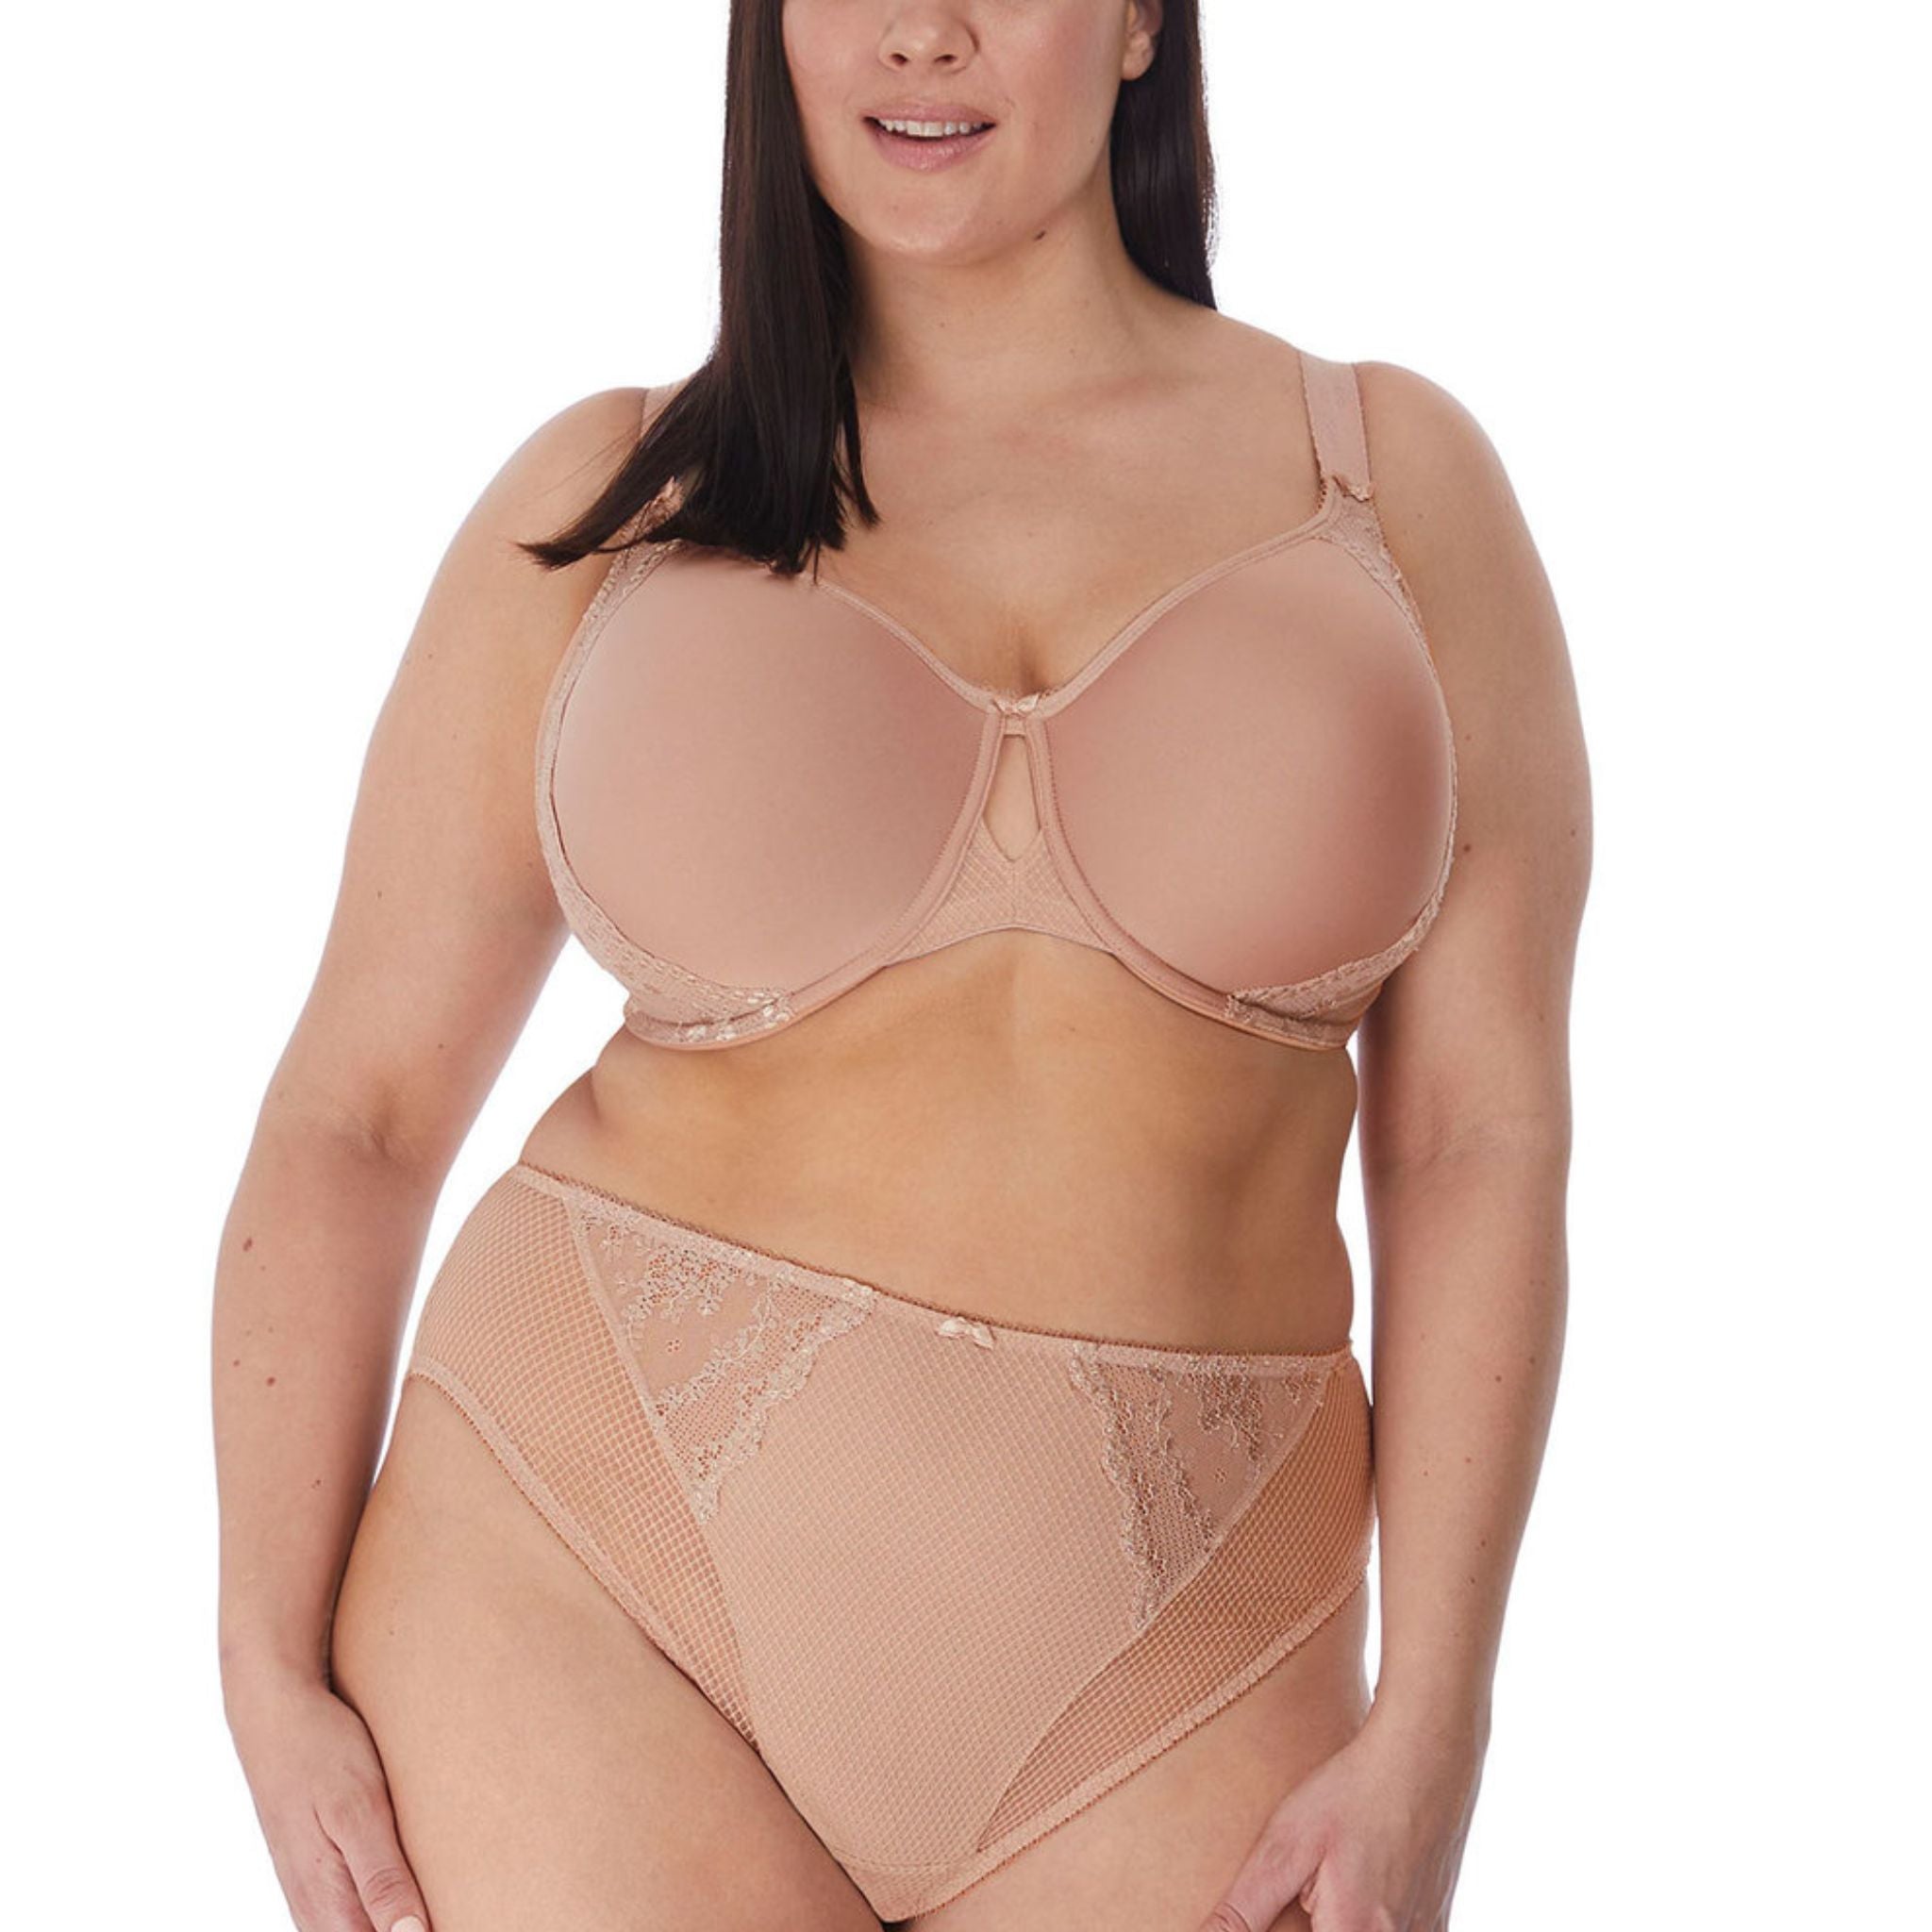 Discover the Charley Bandless Spacer Moulded Bra, complete with pretty floral lace details. The everyday style features seamless moulded cups made from ultra-light spacer fabric for perfect support and rounded shape in sizes DD - HH.